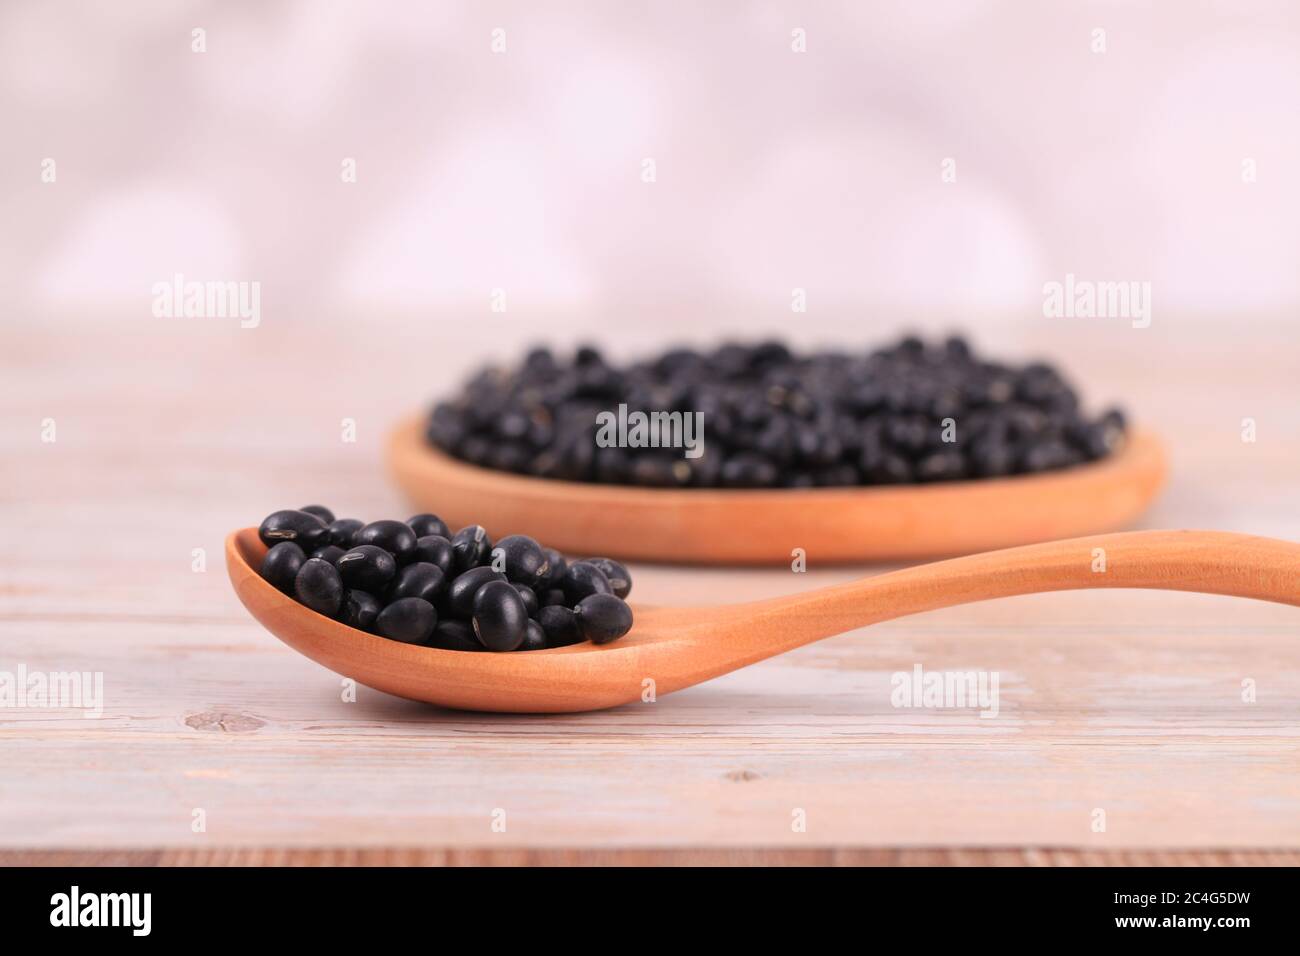 The black beans are on the wooden table Stock Photo